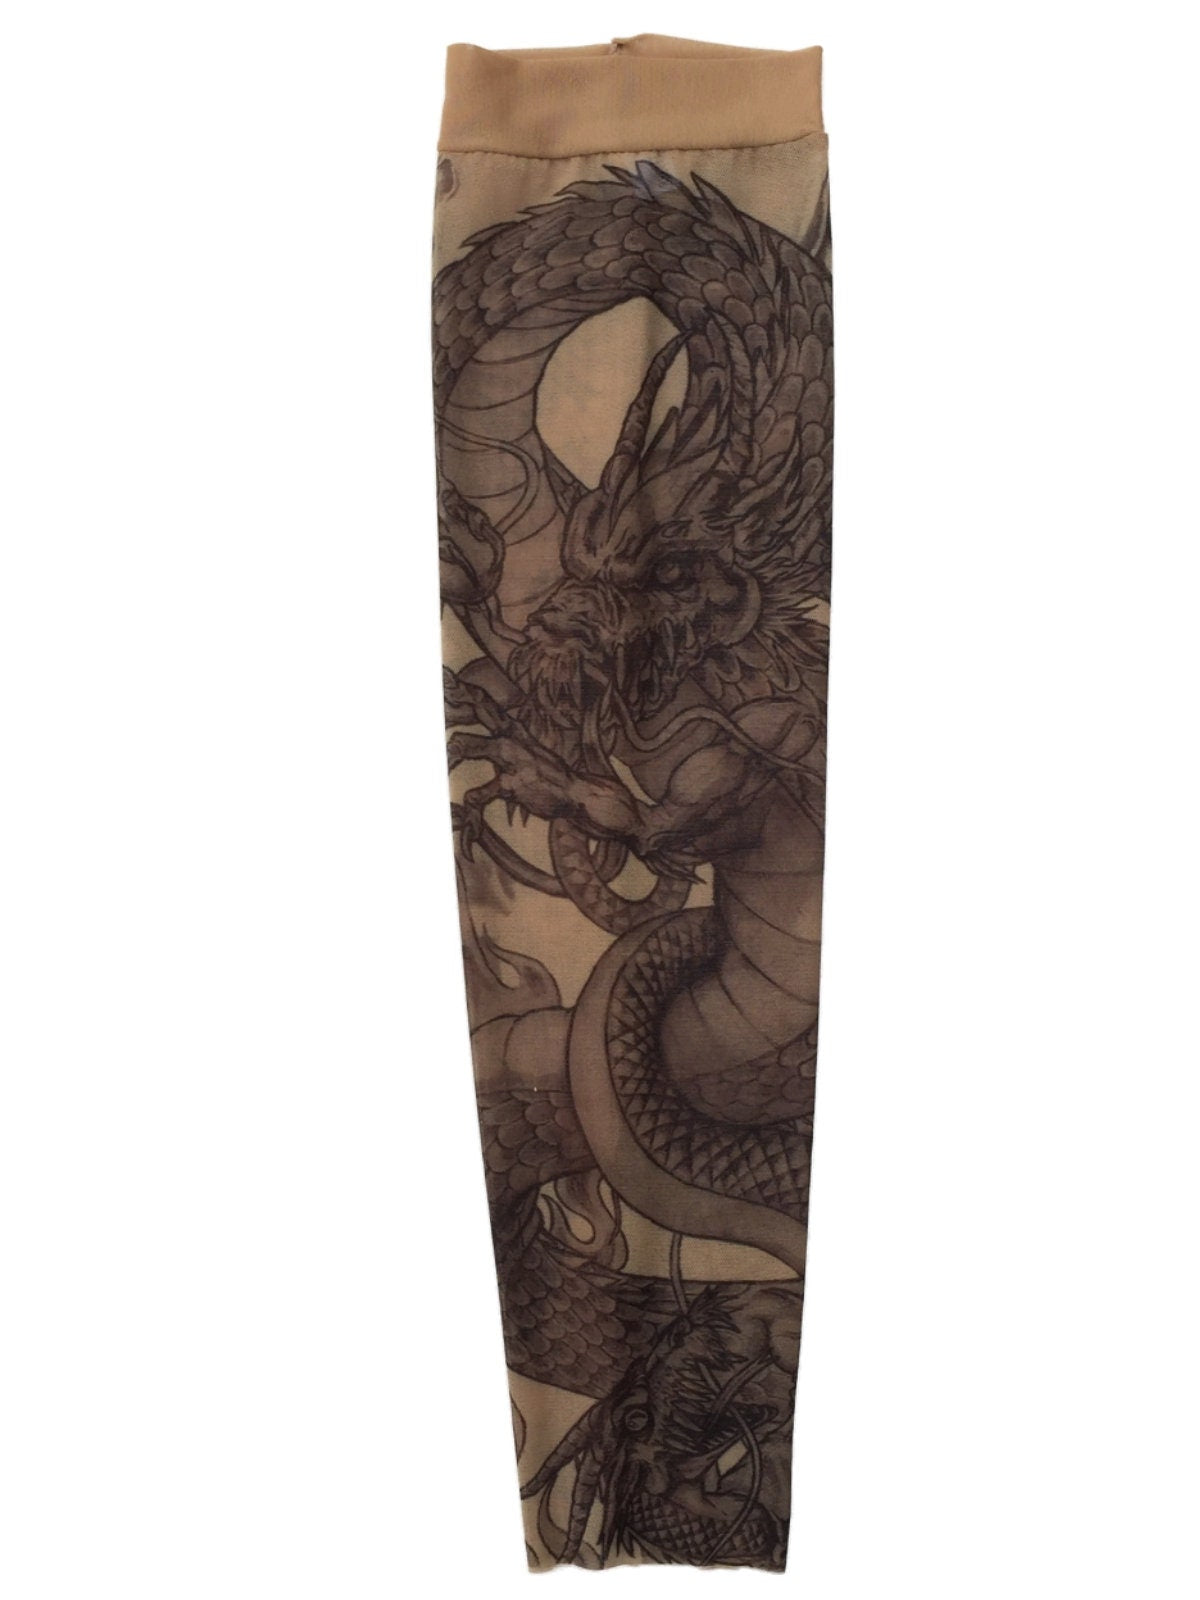 Grim Reaper Dragons Mother Mary Single Tattoo Mesh Sleeve